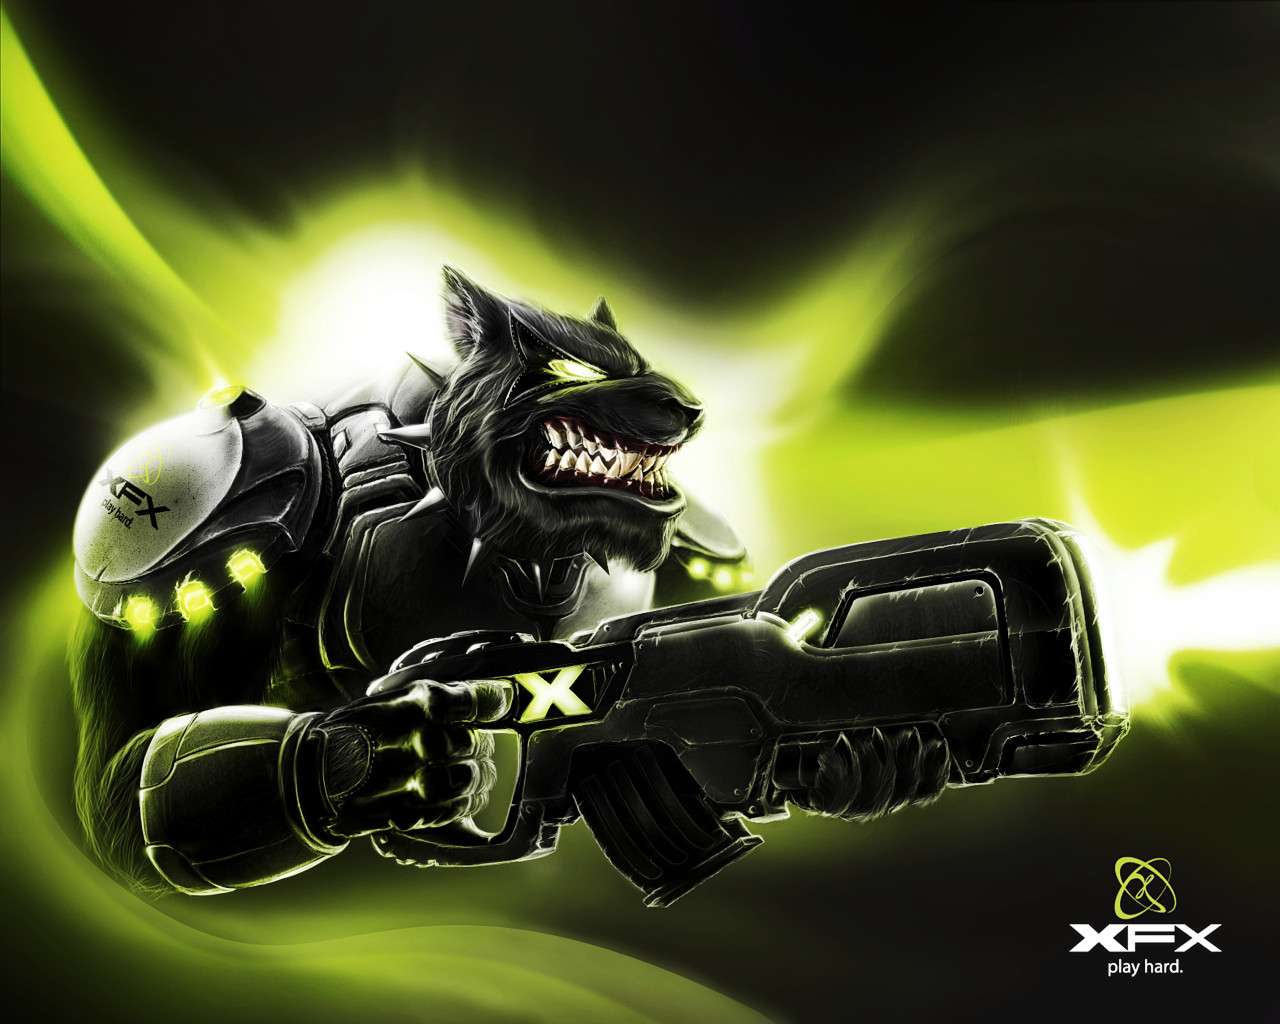 Xfx Dog The Warrior By 7kive Customization Wallpaper Science Fiction